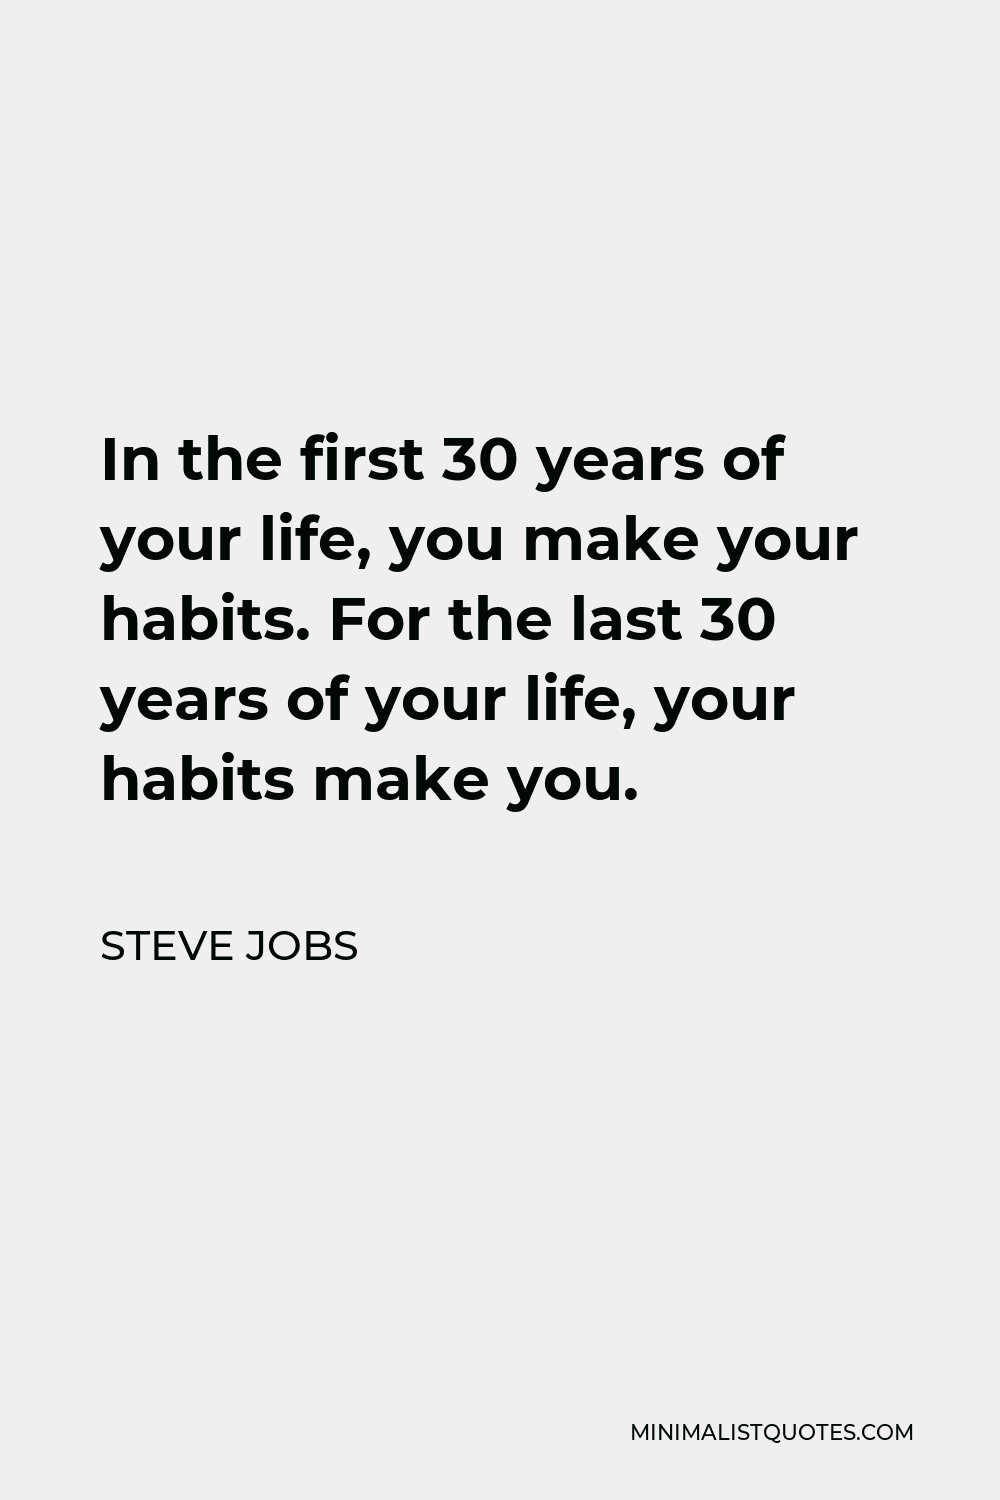 Steve Jobs Quote - In the first 30 years of your life, you make your habits. For the last 30 years of your life, your habits make you.